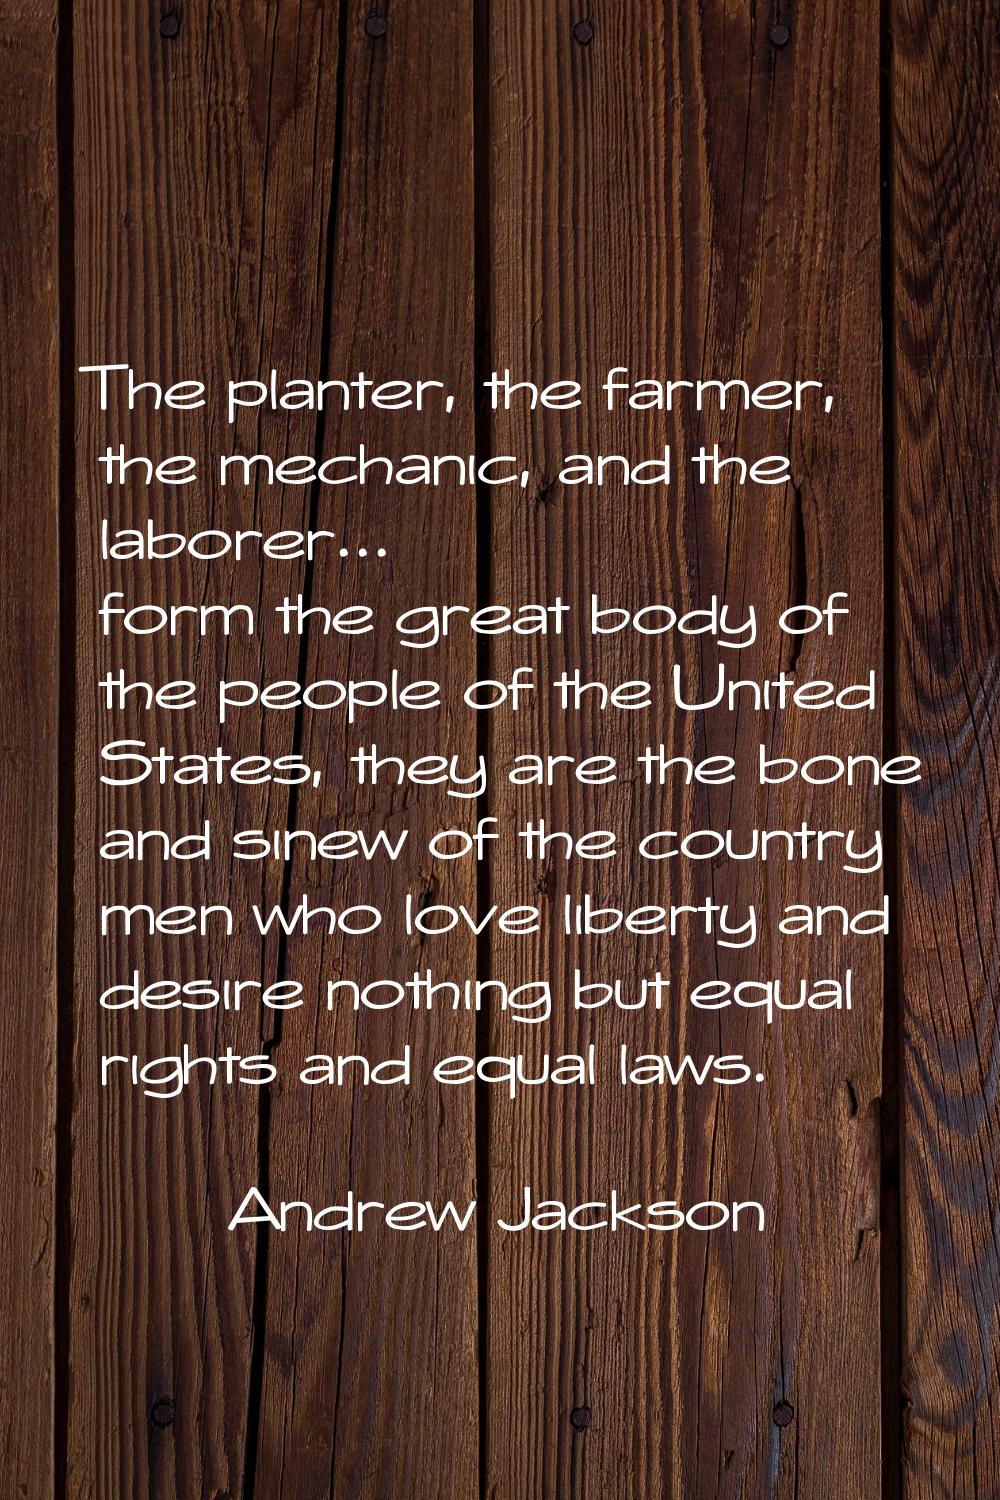 The planter, the farmer, the mechanic, and the laborer... form the great body of the people of the 